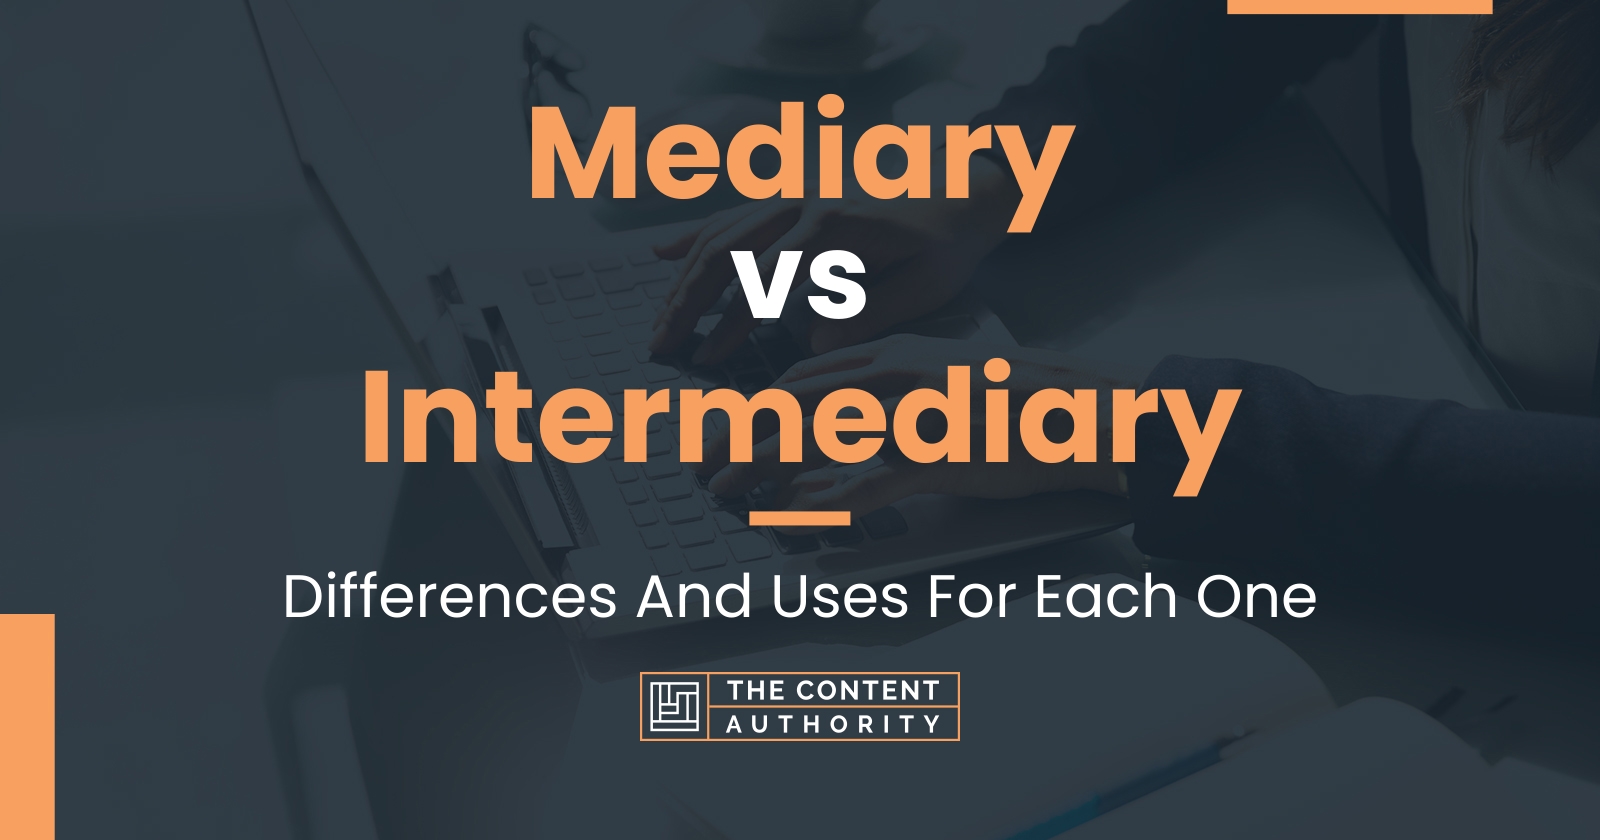 Mediary vs Intermediary: Differences And Uses For Each One